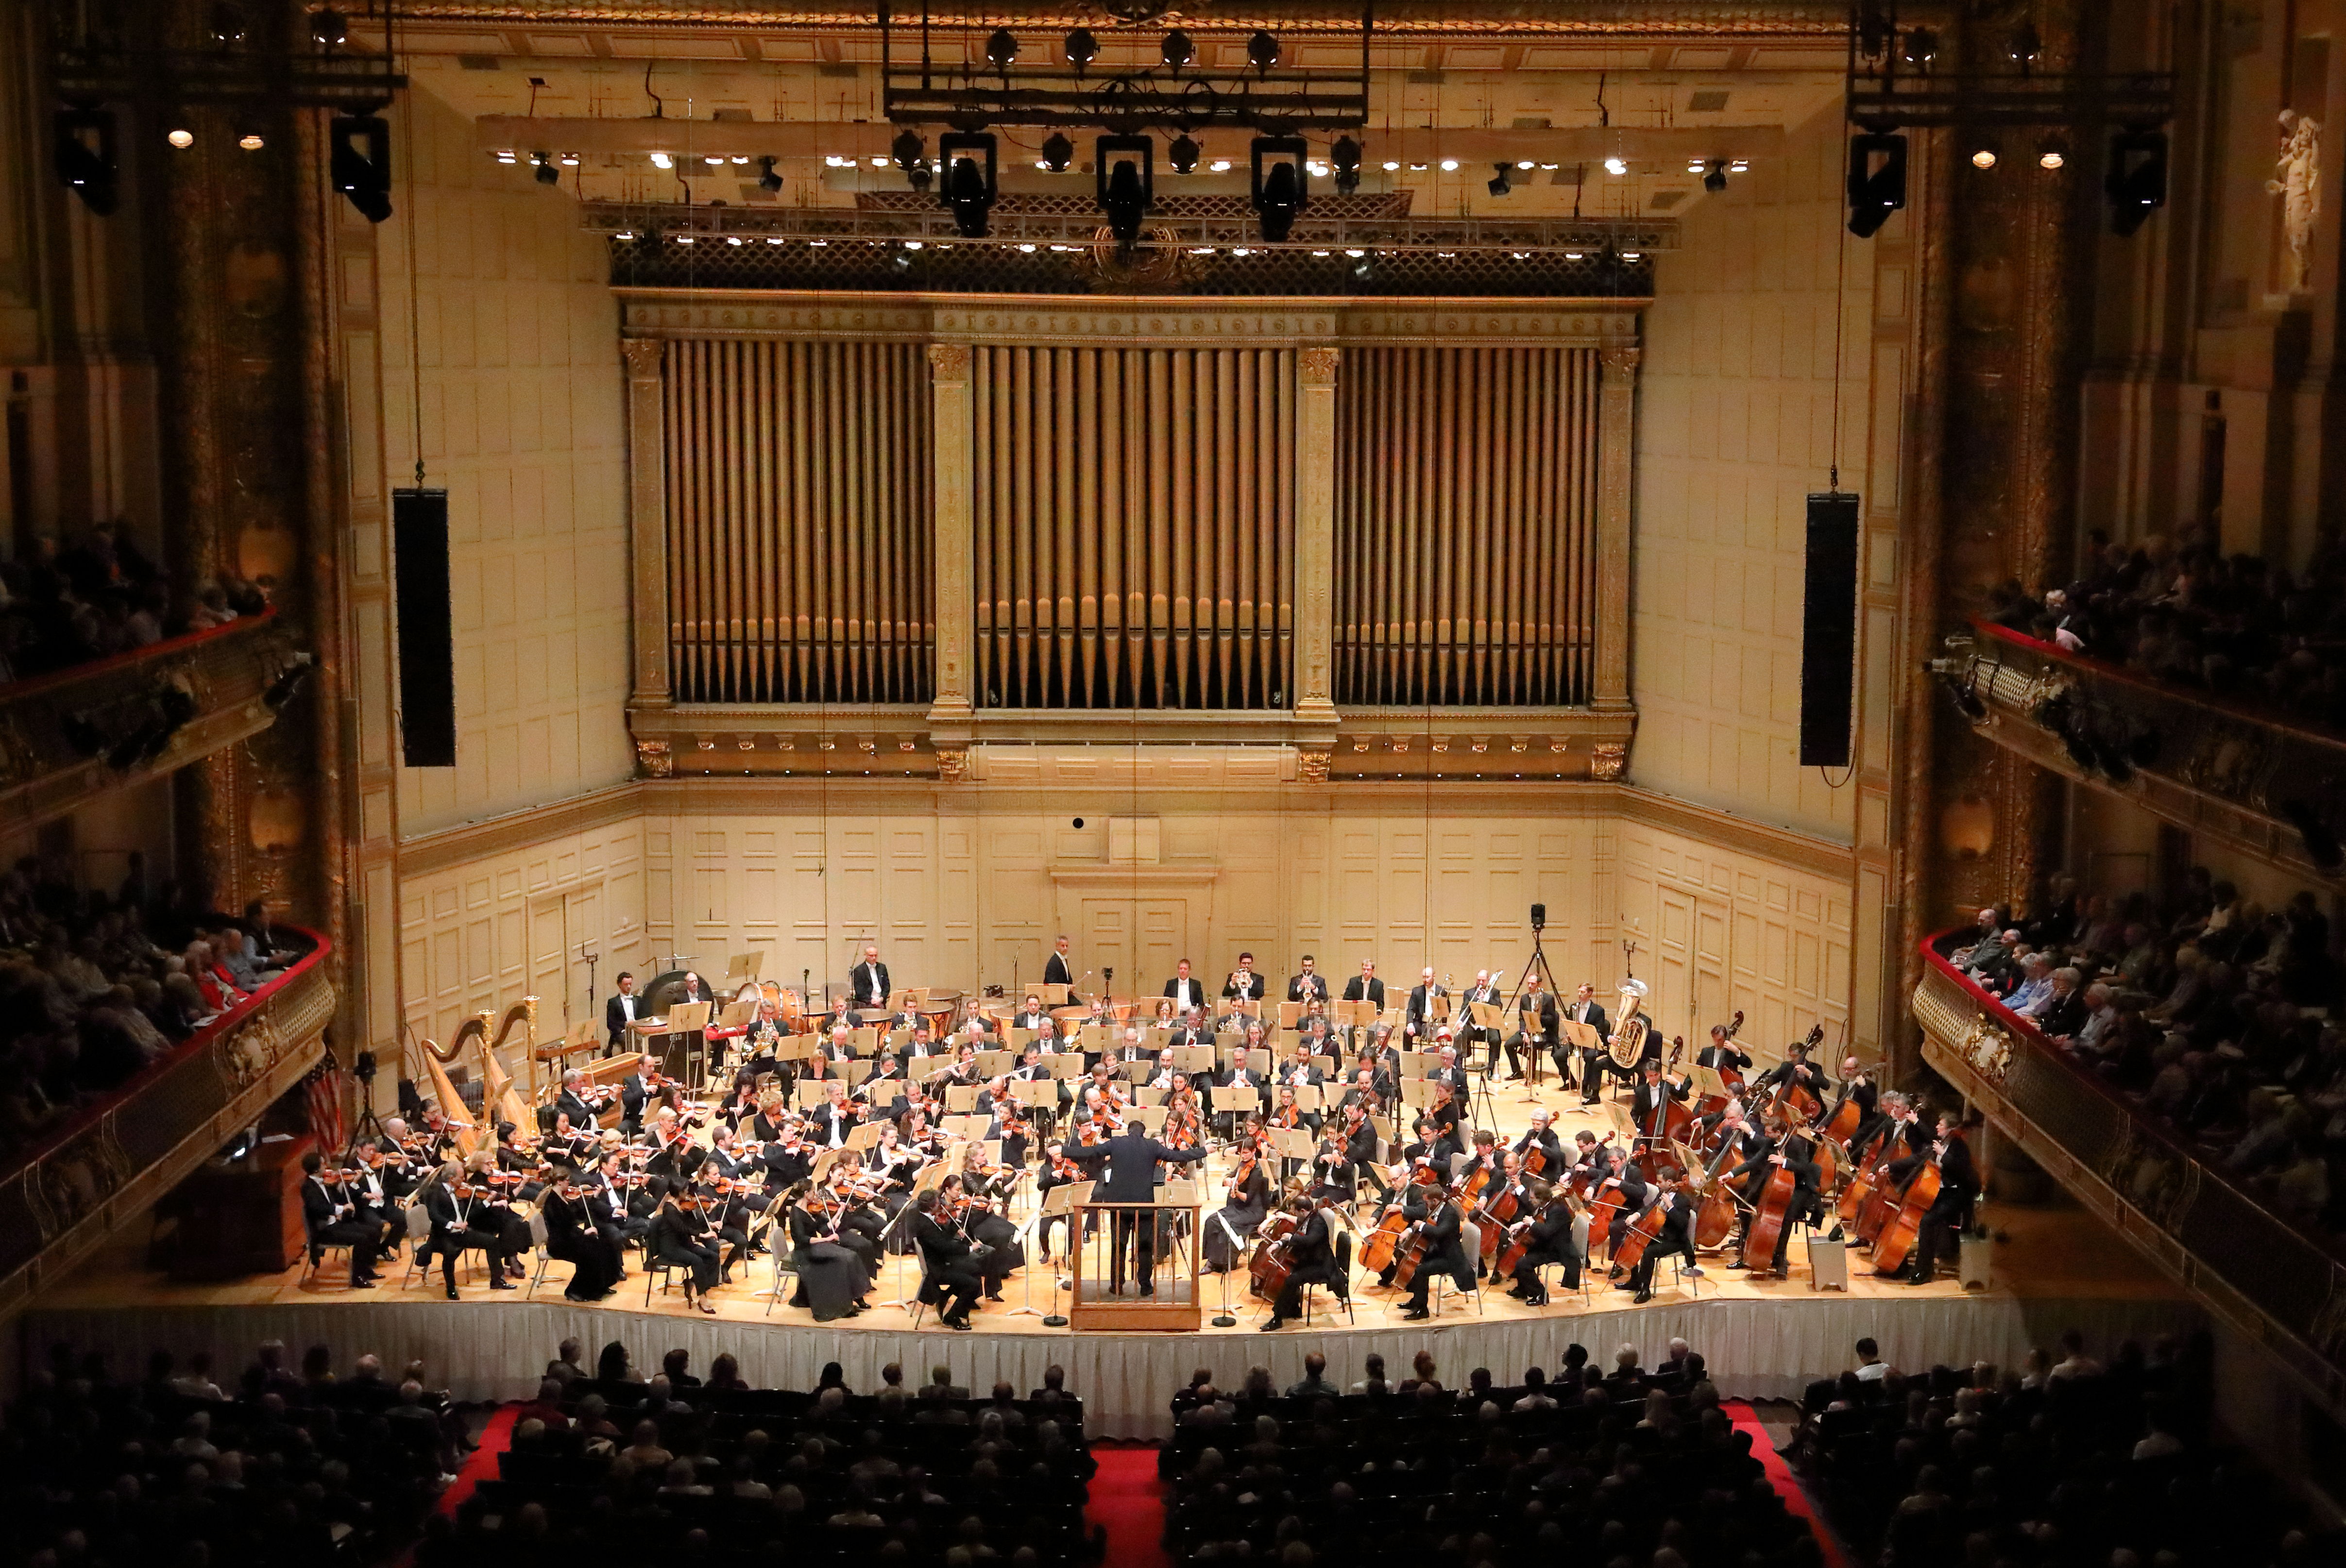 Boston Symphony Conductor Andris Nelsons On Why Symphony Hall Tops